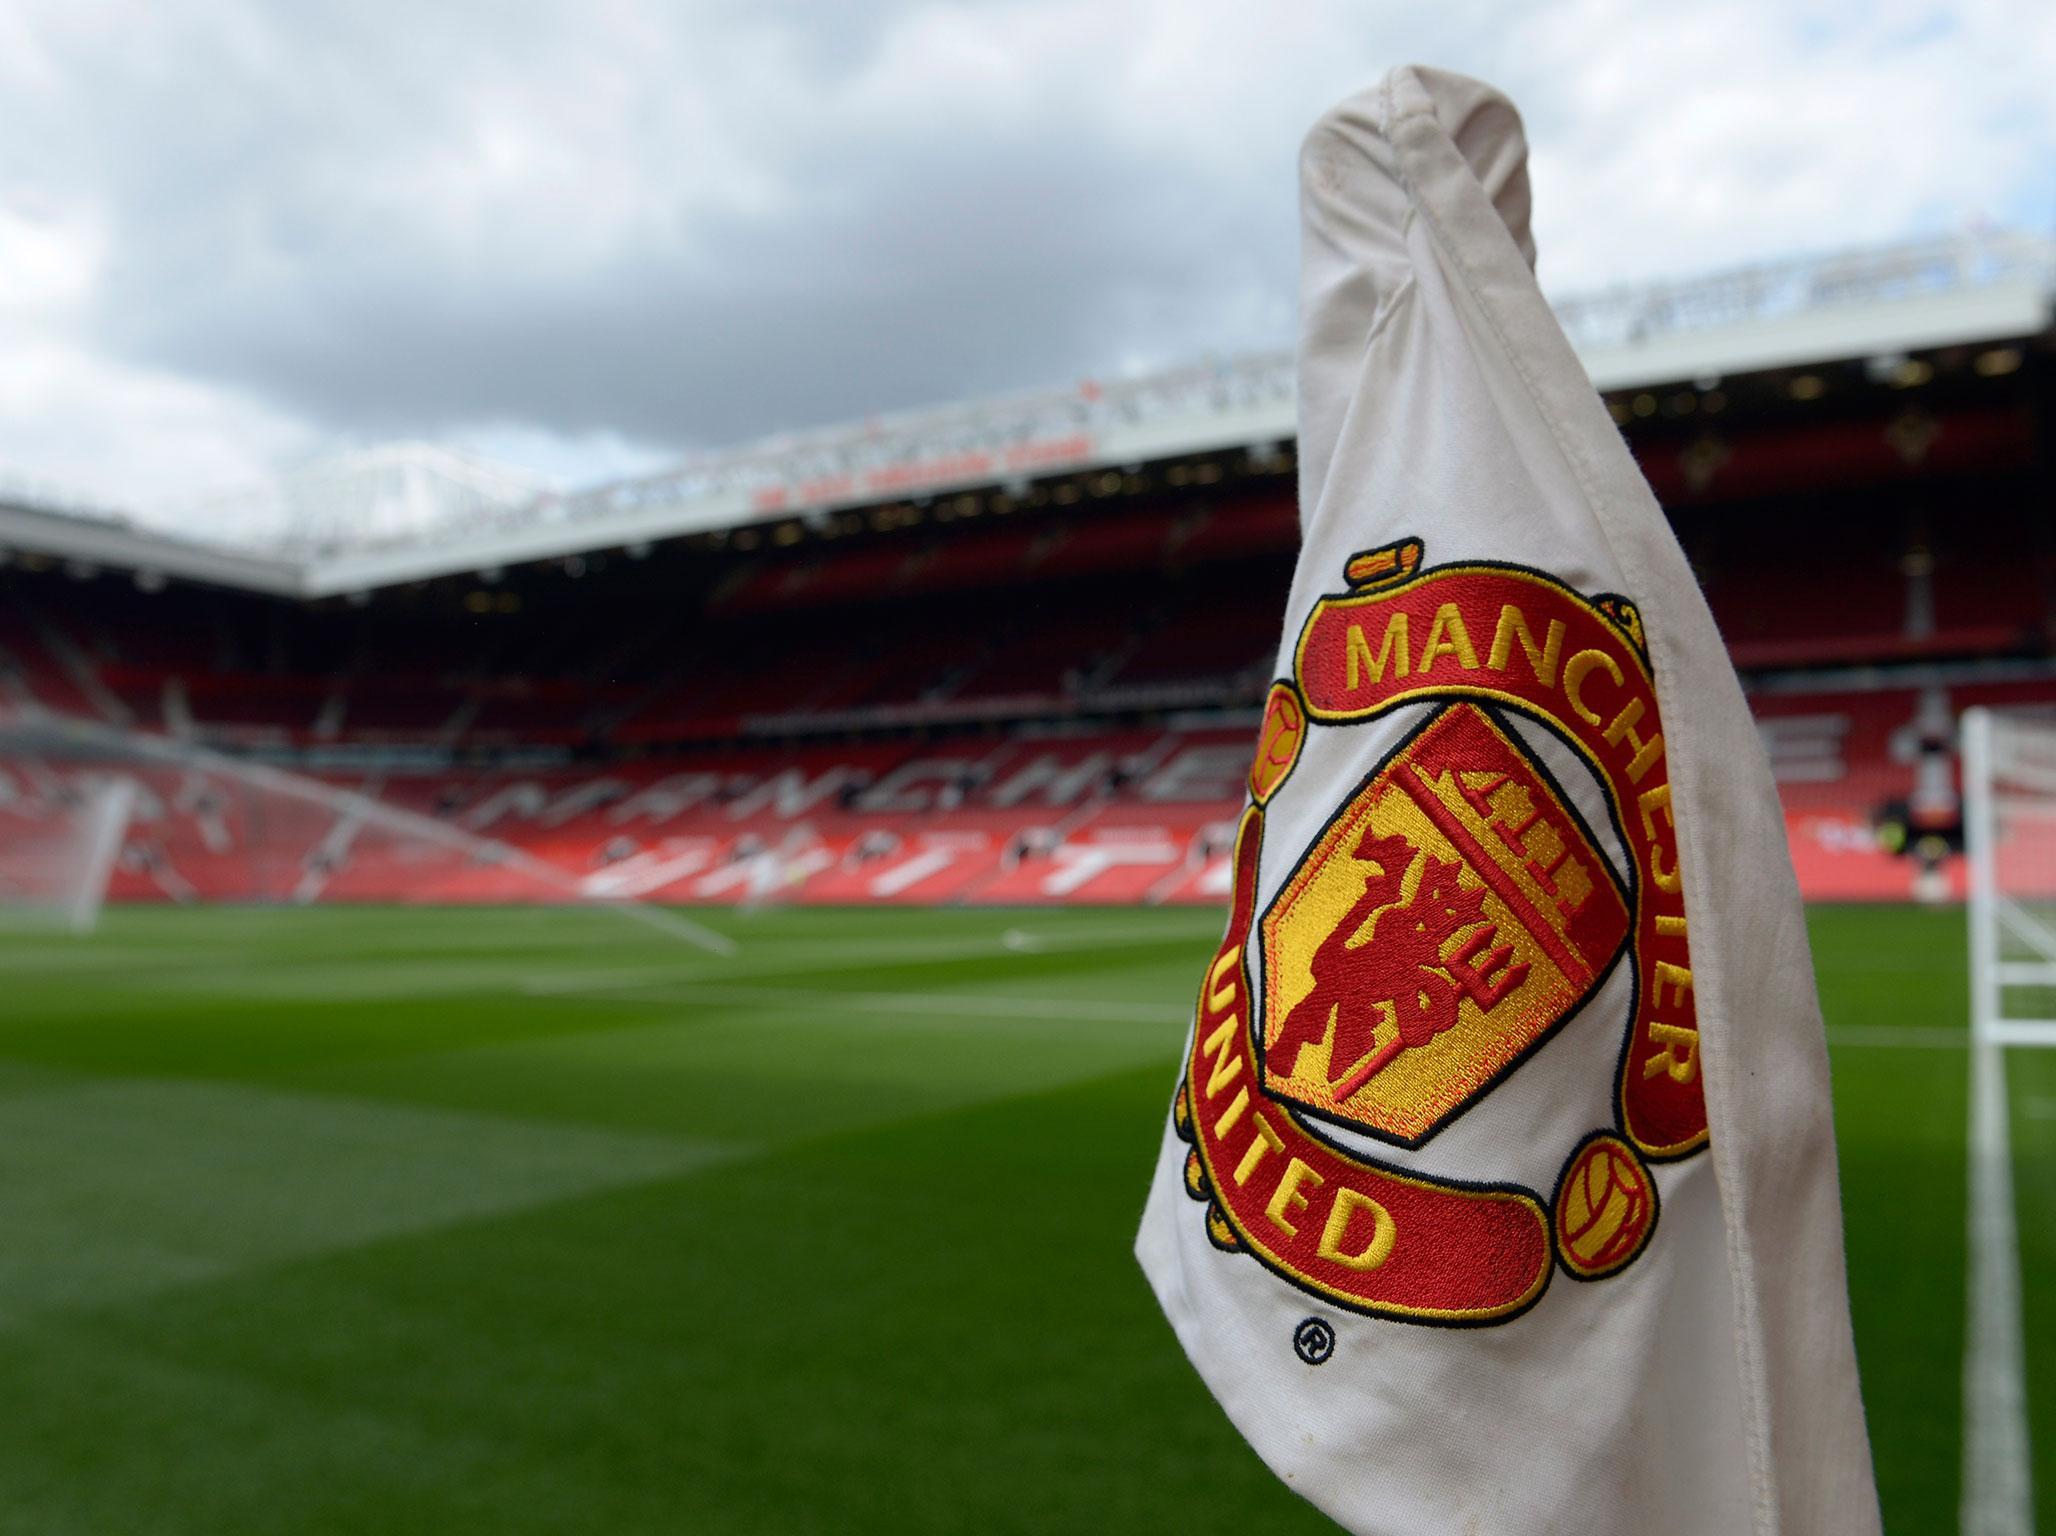 Manchester United have posted record-breaking revenues for the second consecutive year